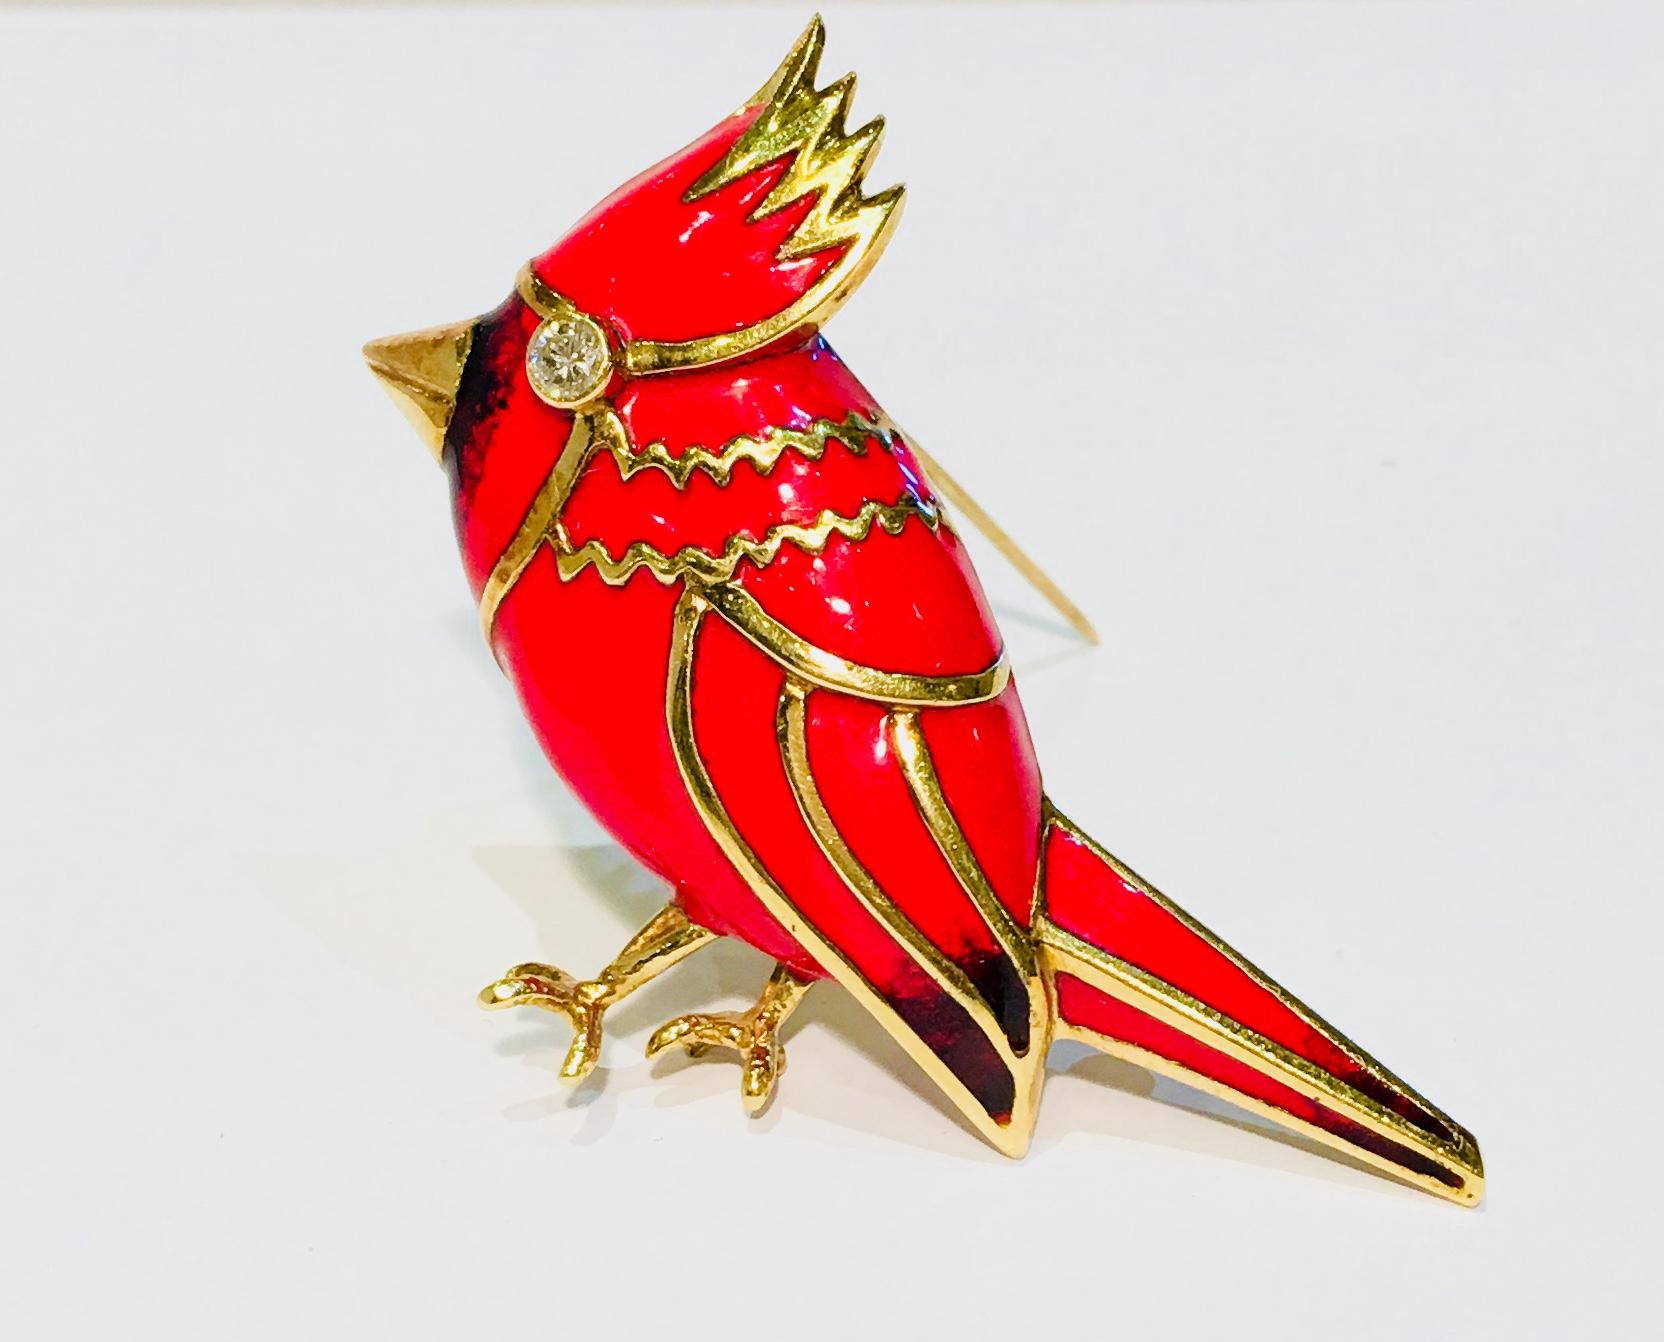 18 karat yellow gold brooch with predominantly red enamel overlay is a stylized Cardinal bird with a bezel set diamond eye .

Diamond measures 3mm in diameter and weighs approximately .11 carats. 

Face of brooch pin measures 37.27 mm x 52.64 mm x